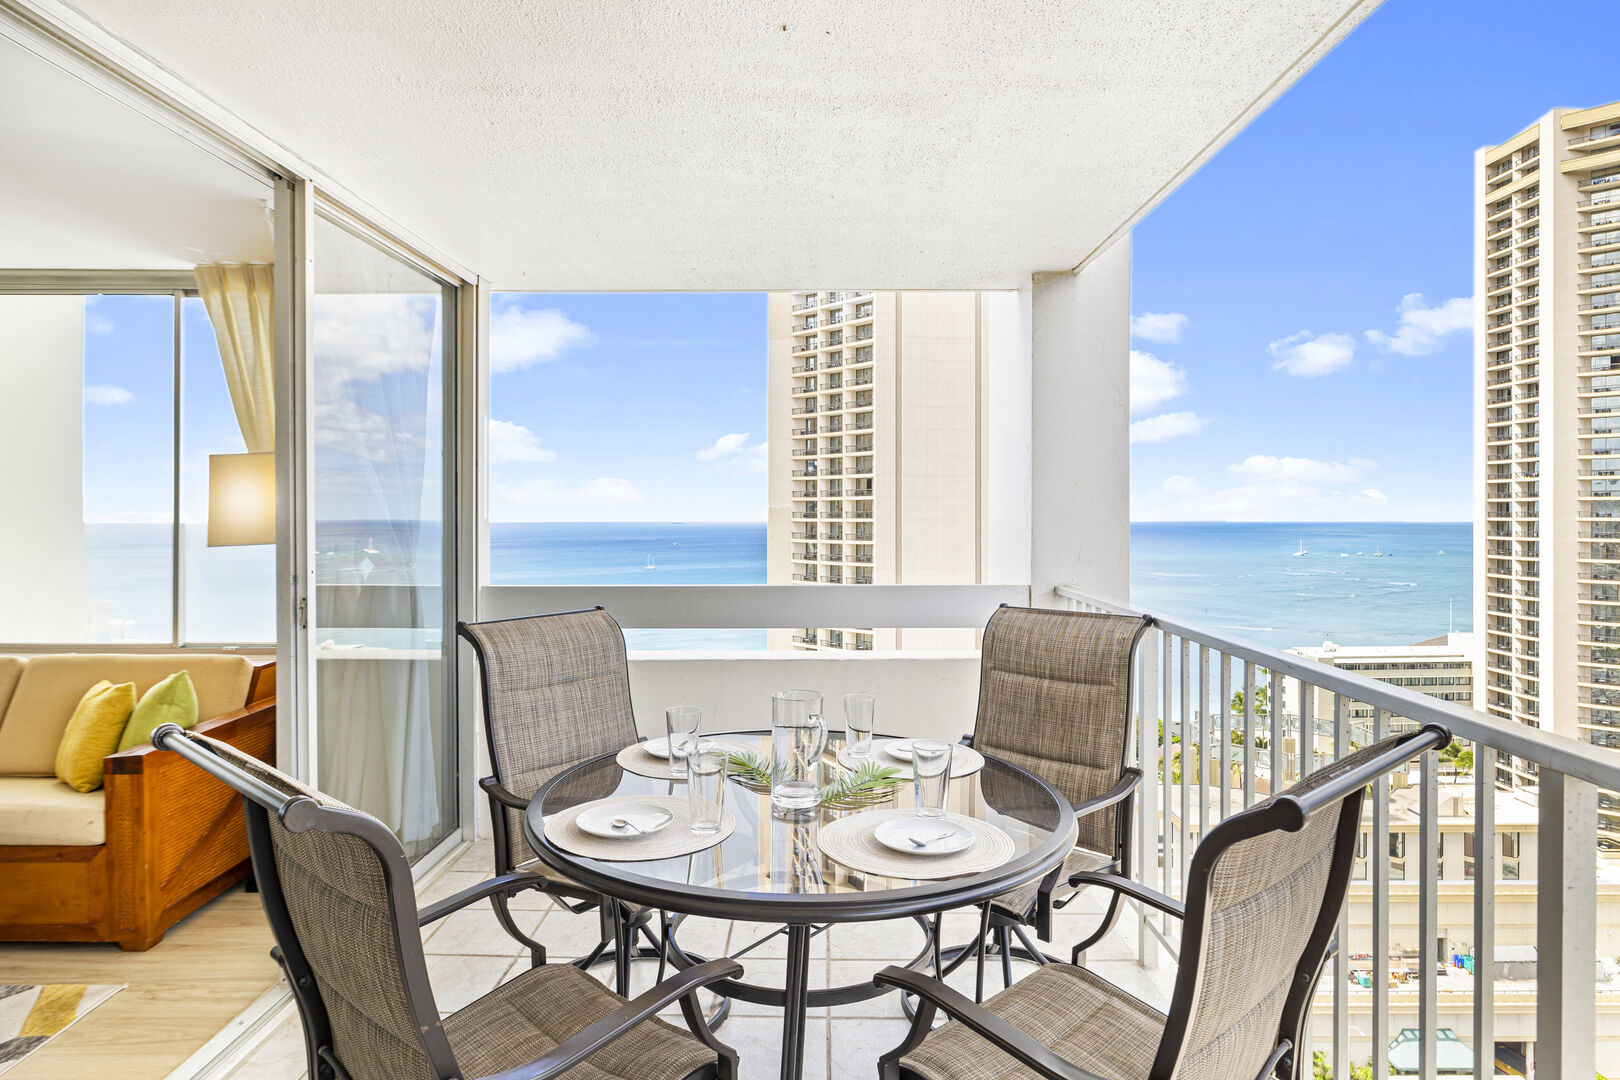 Enjoy the relaxing views of the ocean from your balcony!